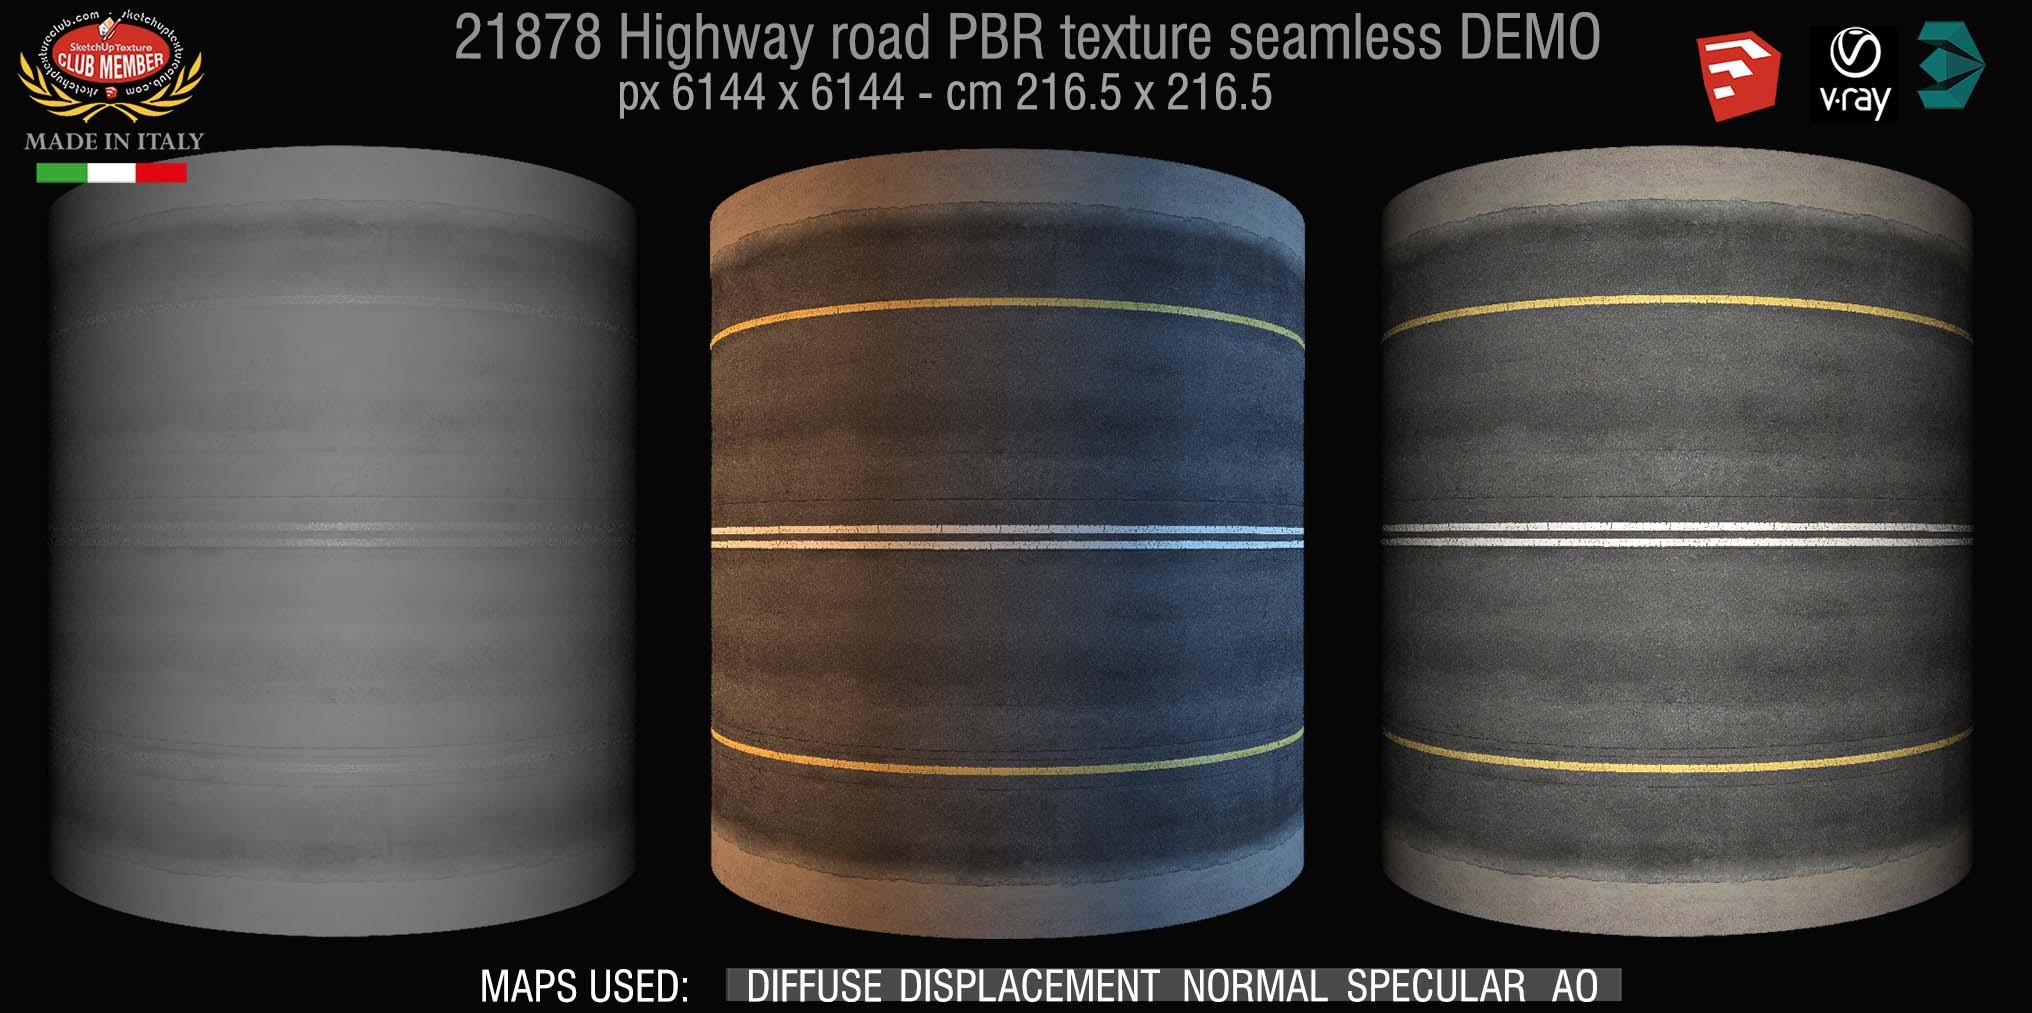 21878 Highway road PBR texture seamless DEMO